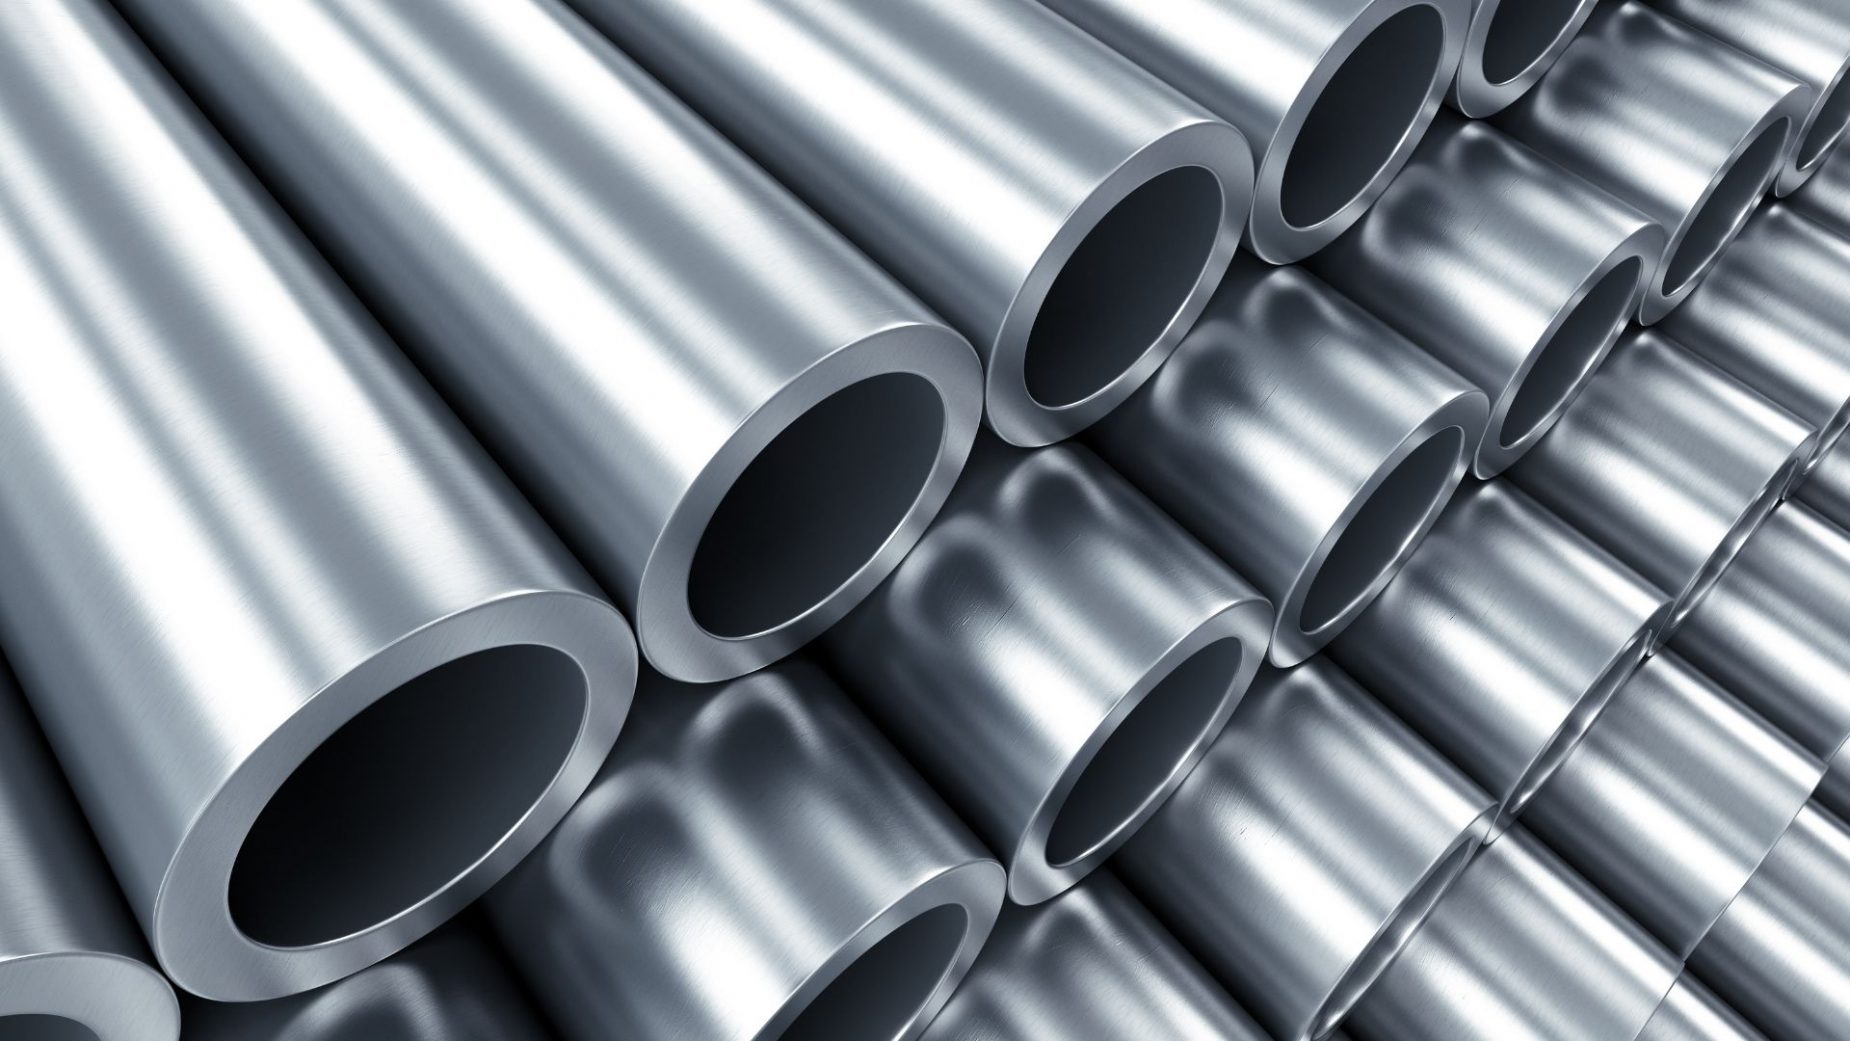 Steel Products Market